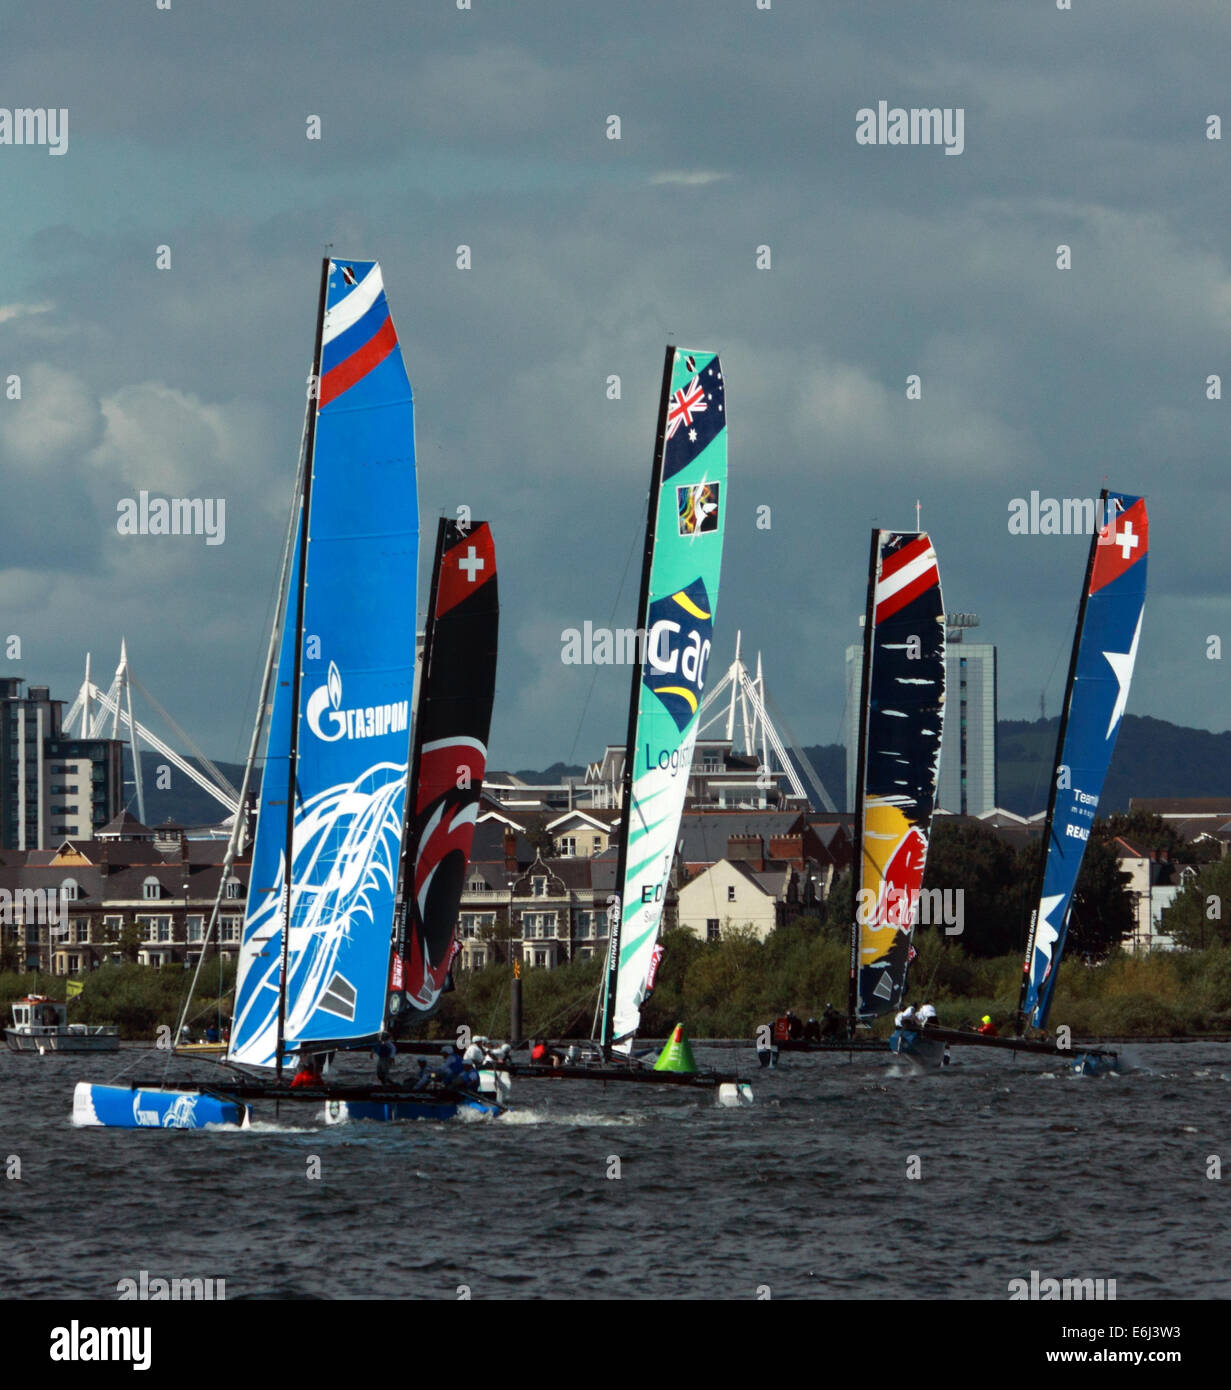 Catamarans taking part in Extreme sailing event in Cardiff Bay, 23rd August 2014 Stock Photo